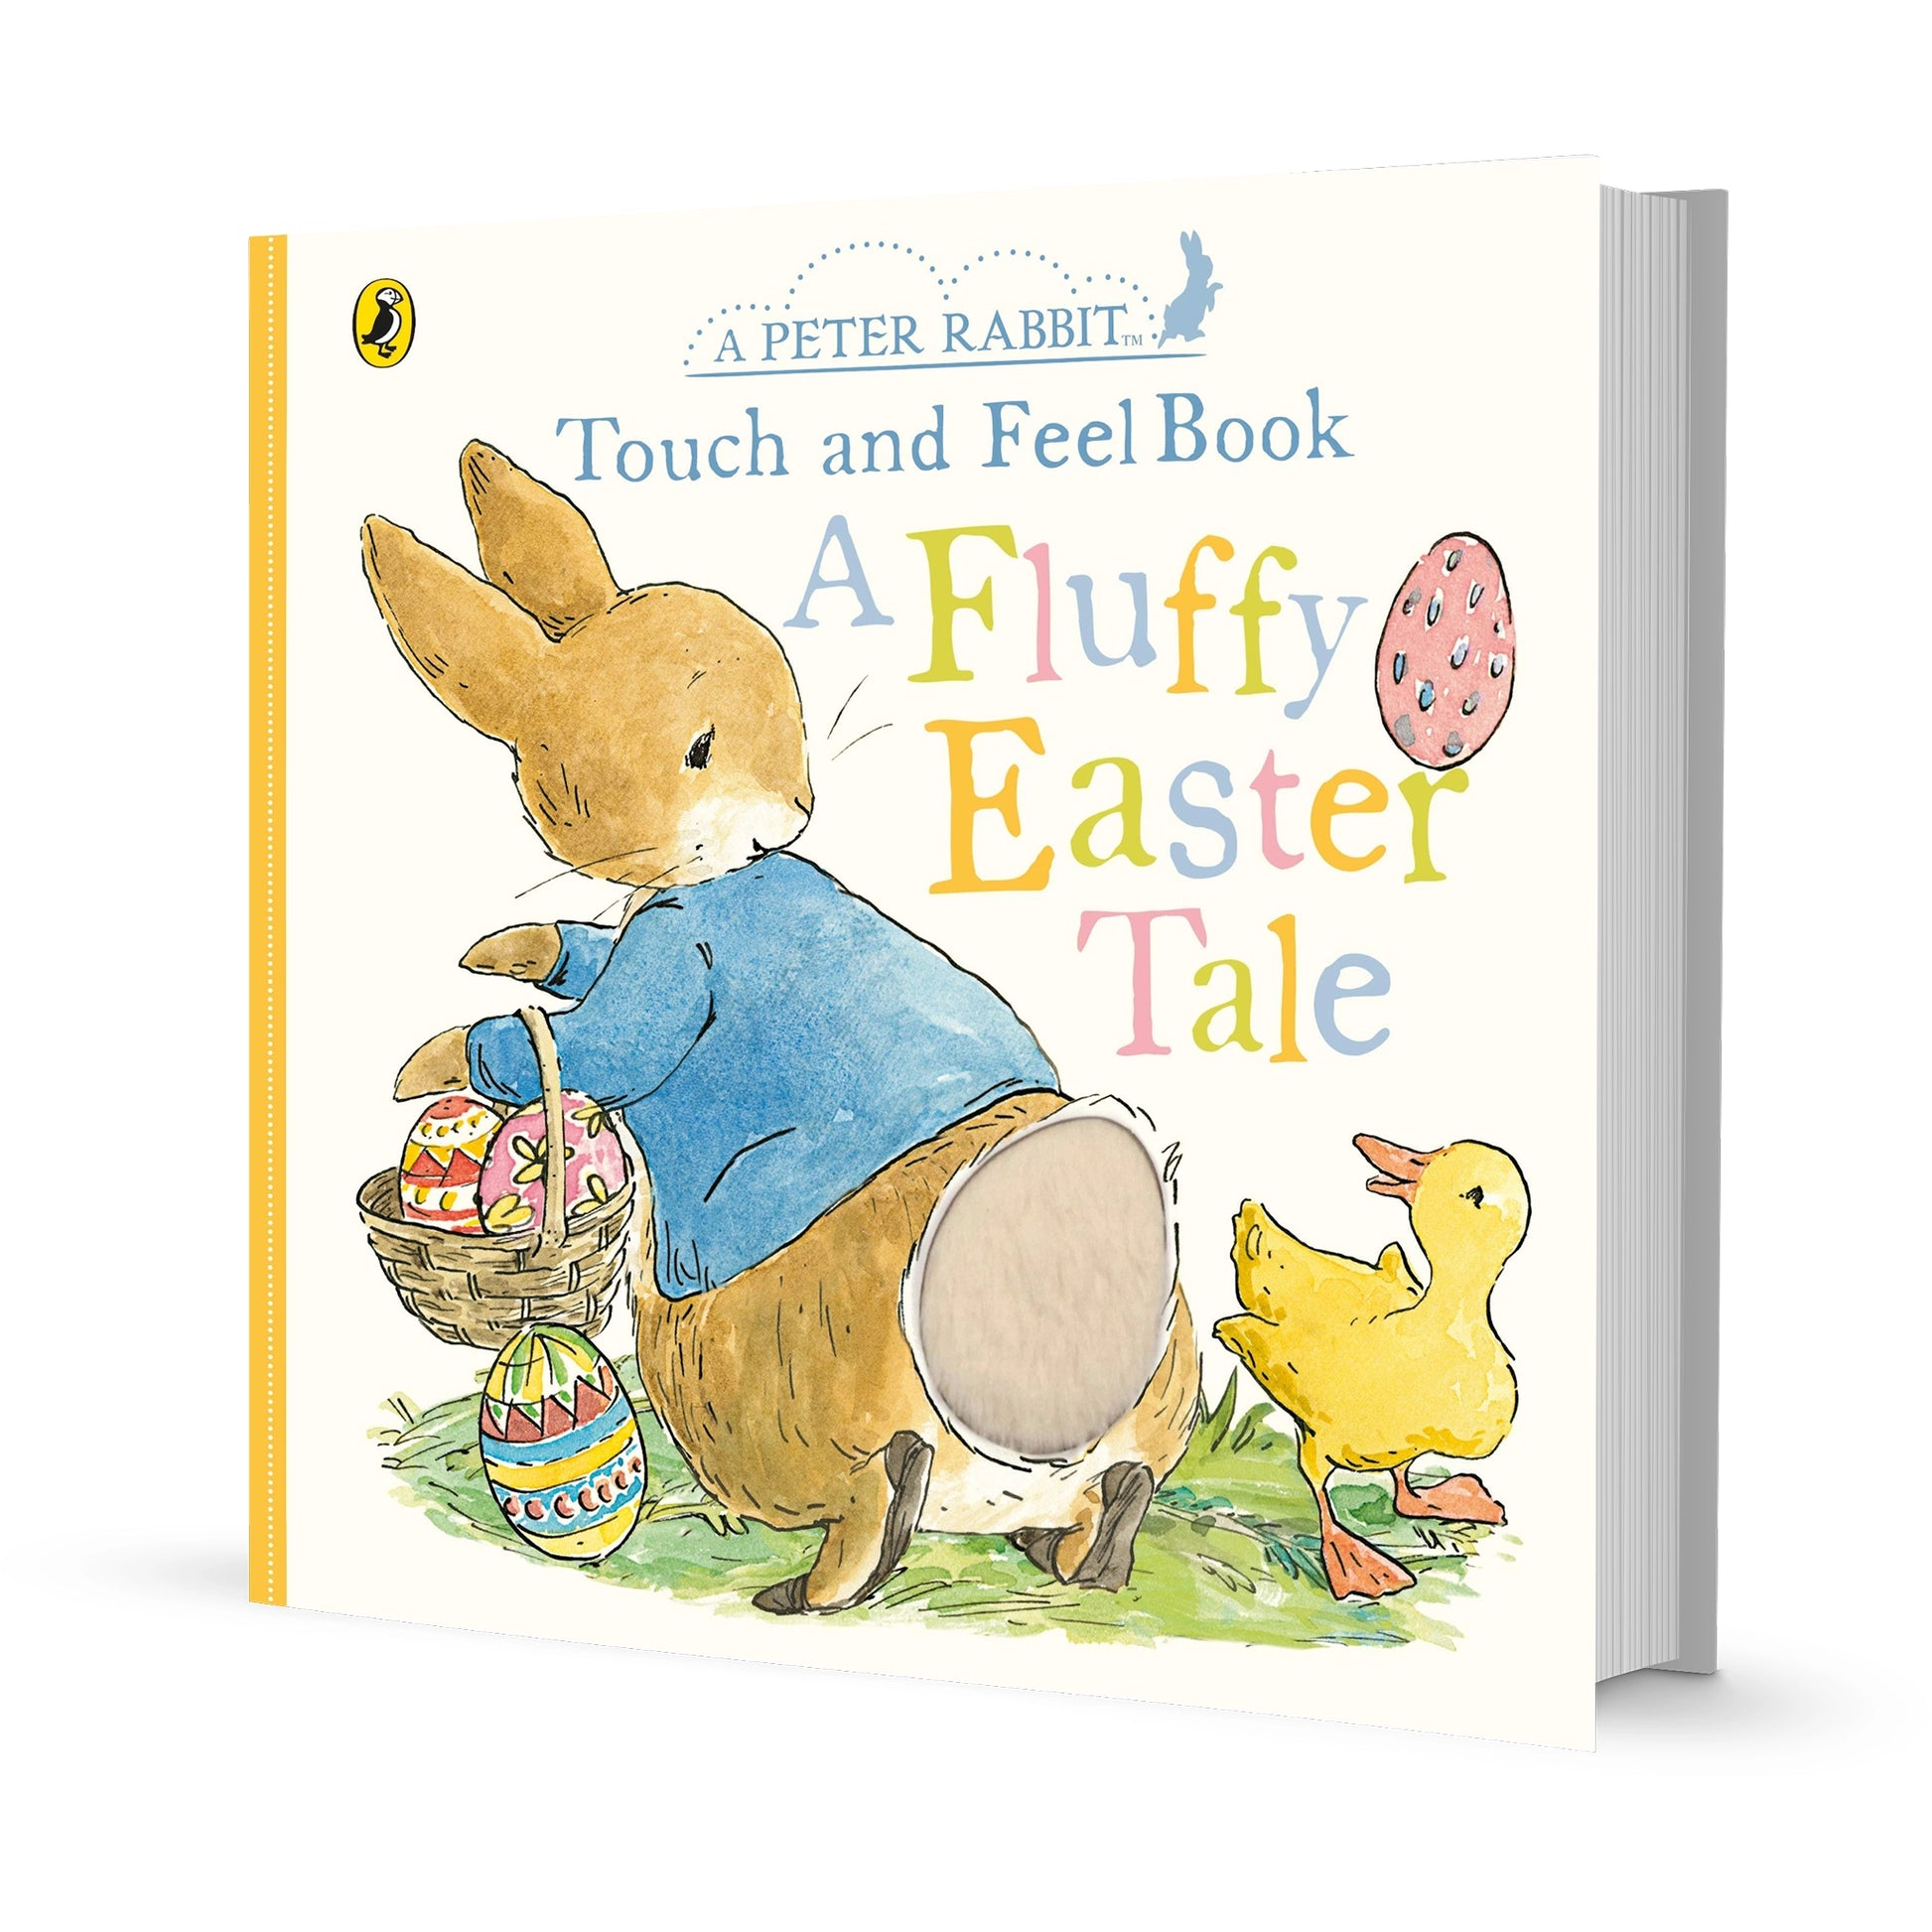 Peter Rabbit: A Fluffy Easter Tale (touch and feel board book) - Bookspeed - The Forgotten Toy Shop